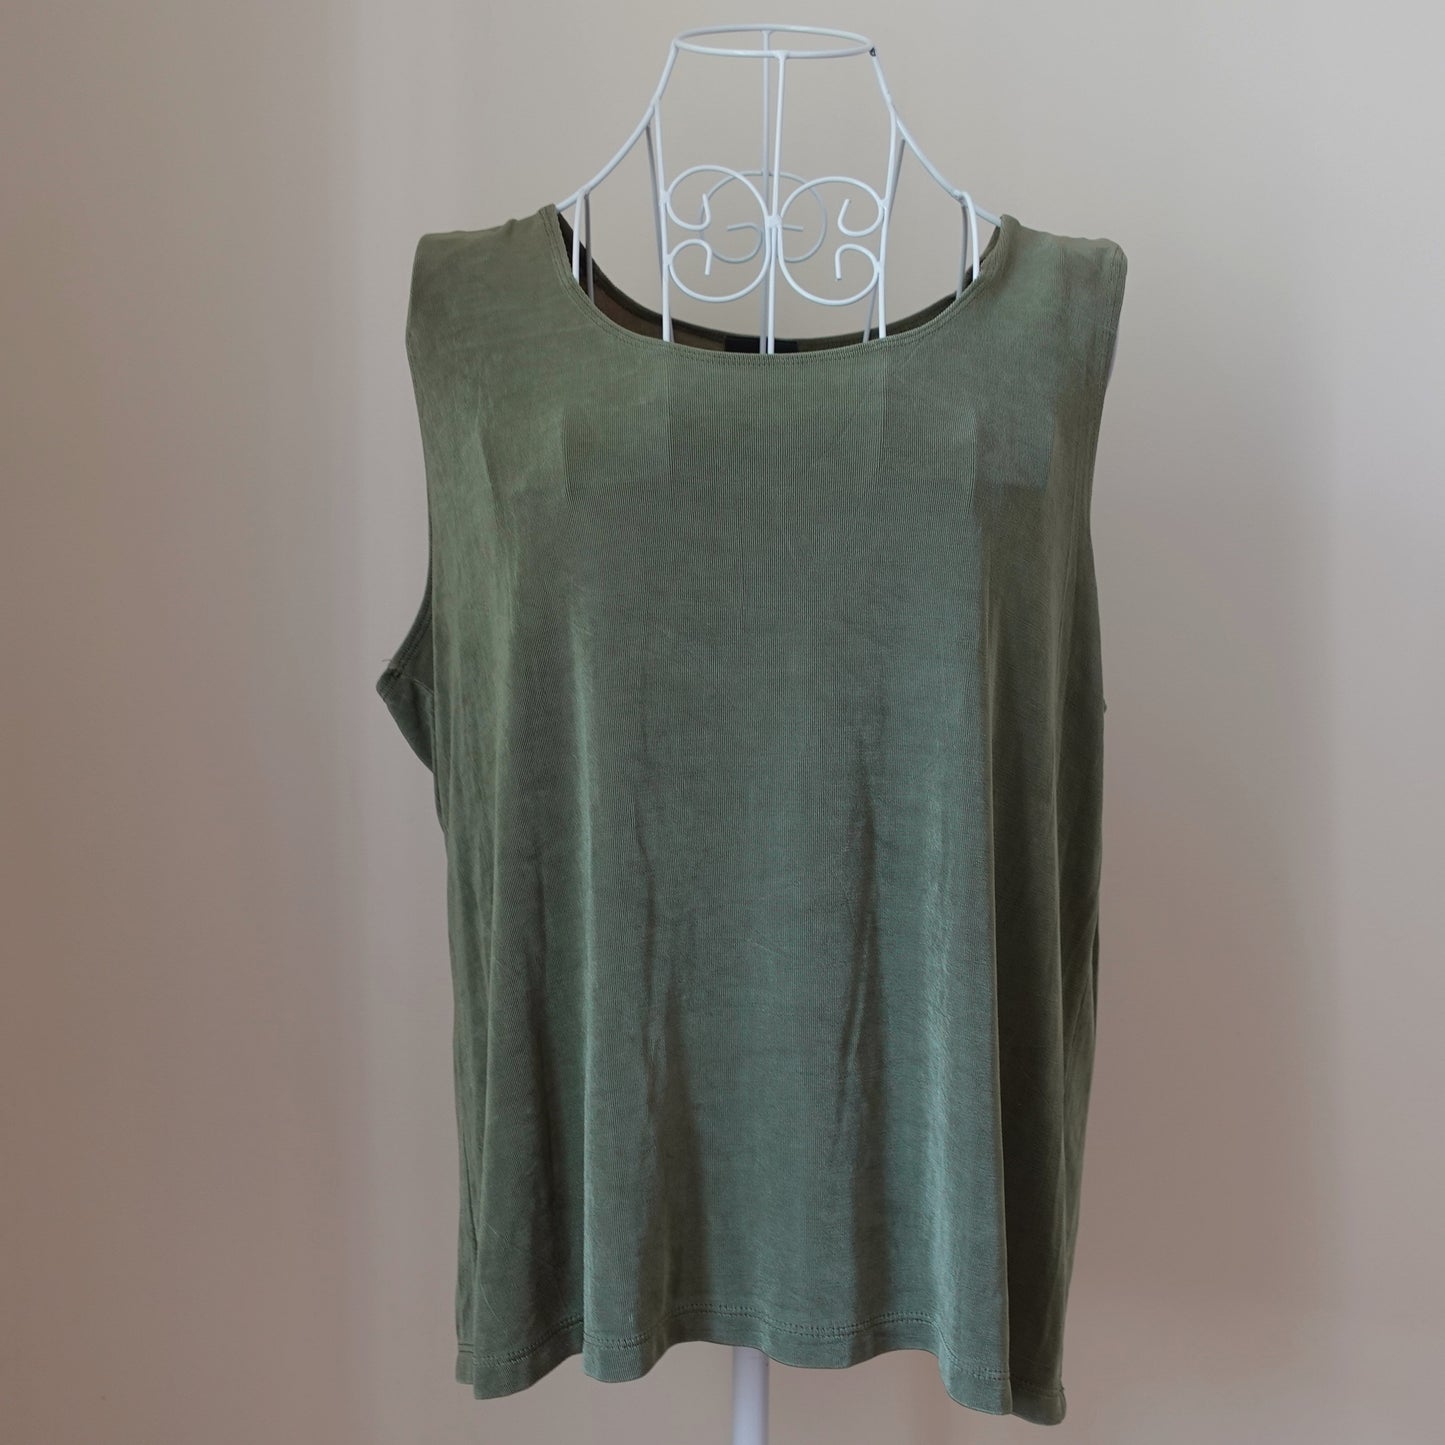 sage green sleeveless top with stretch